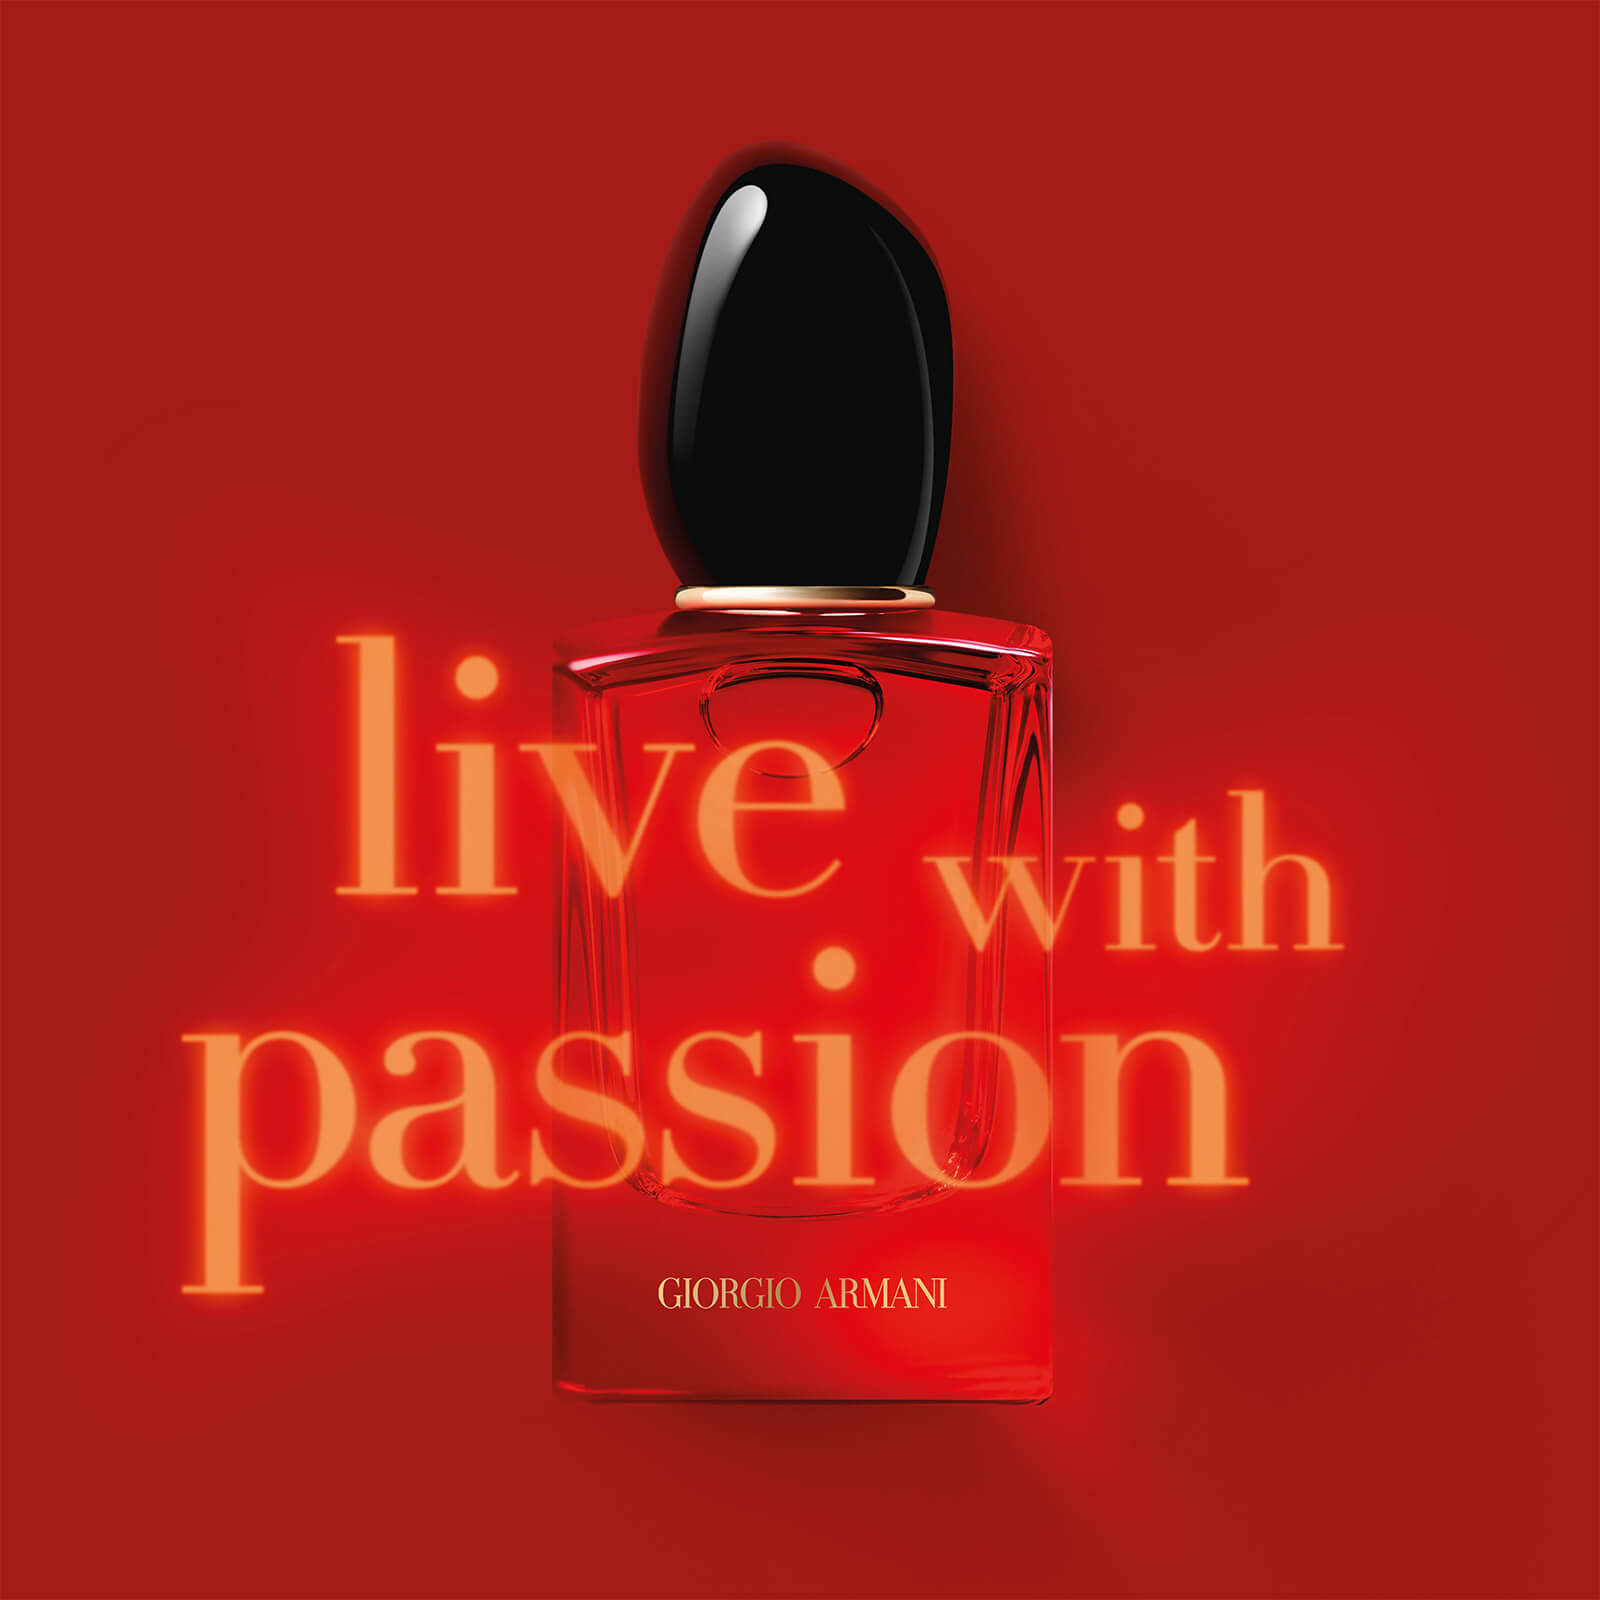 Live with passion